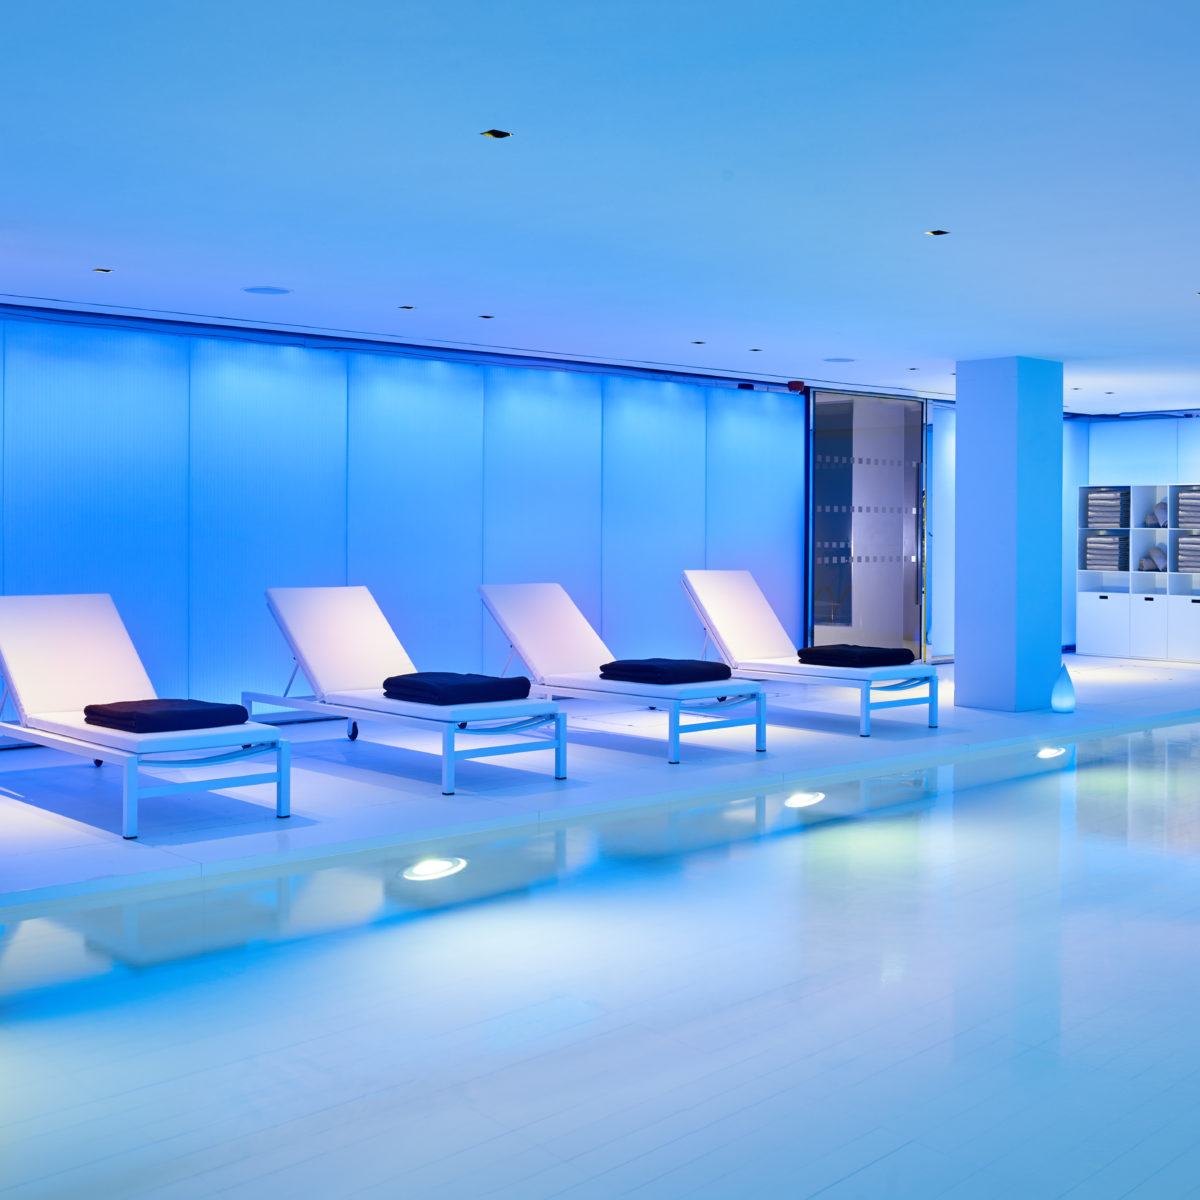 15 metre indoor heated swimming pool with step access and four lounge chairs